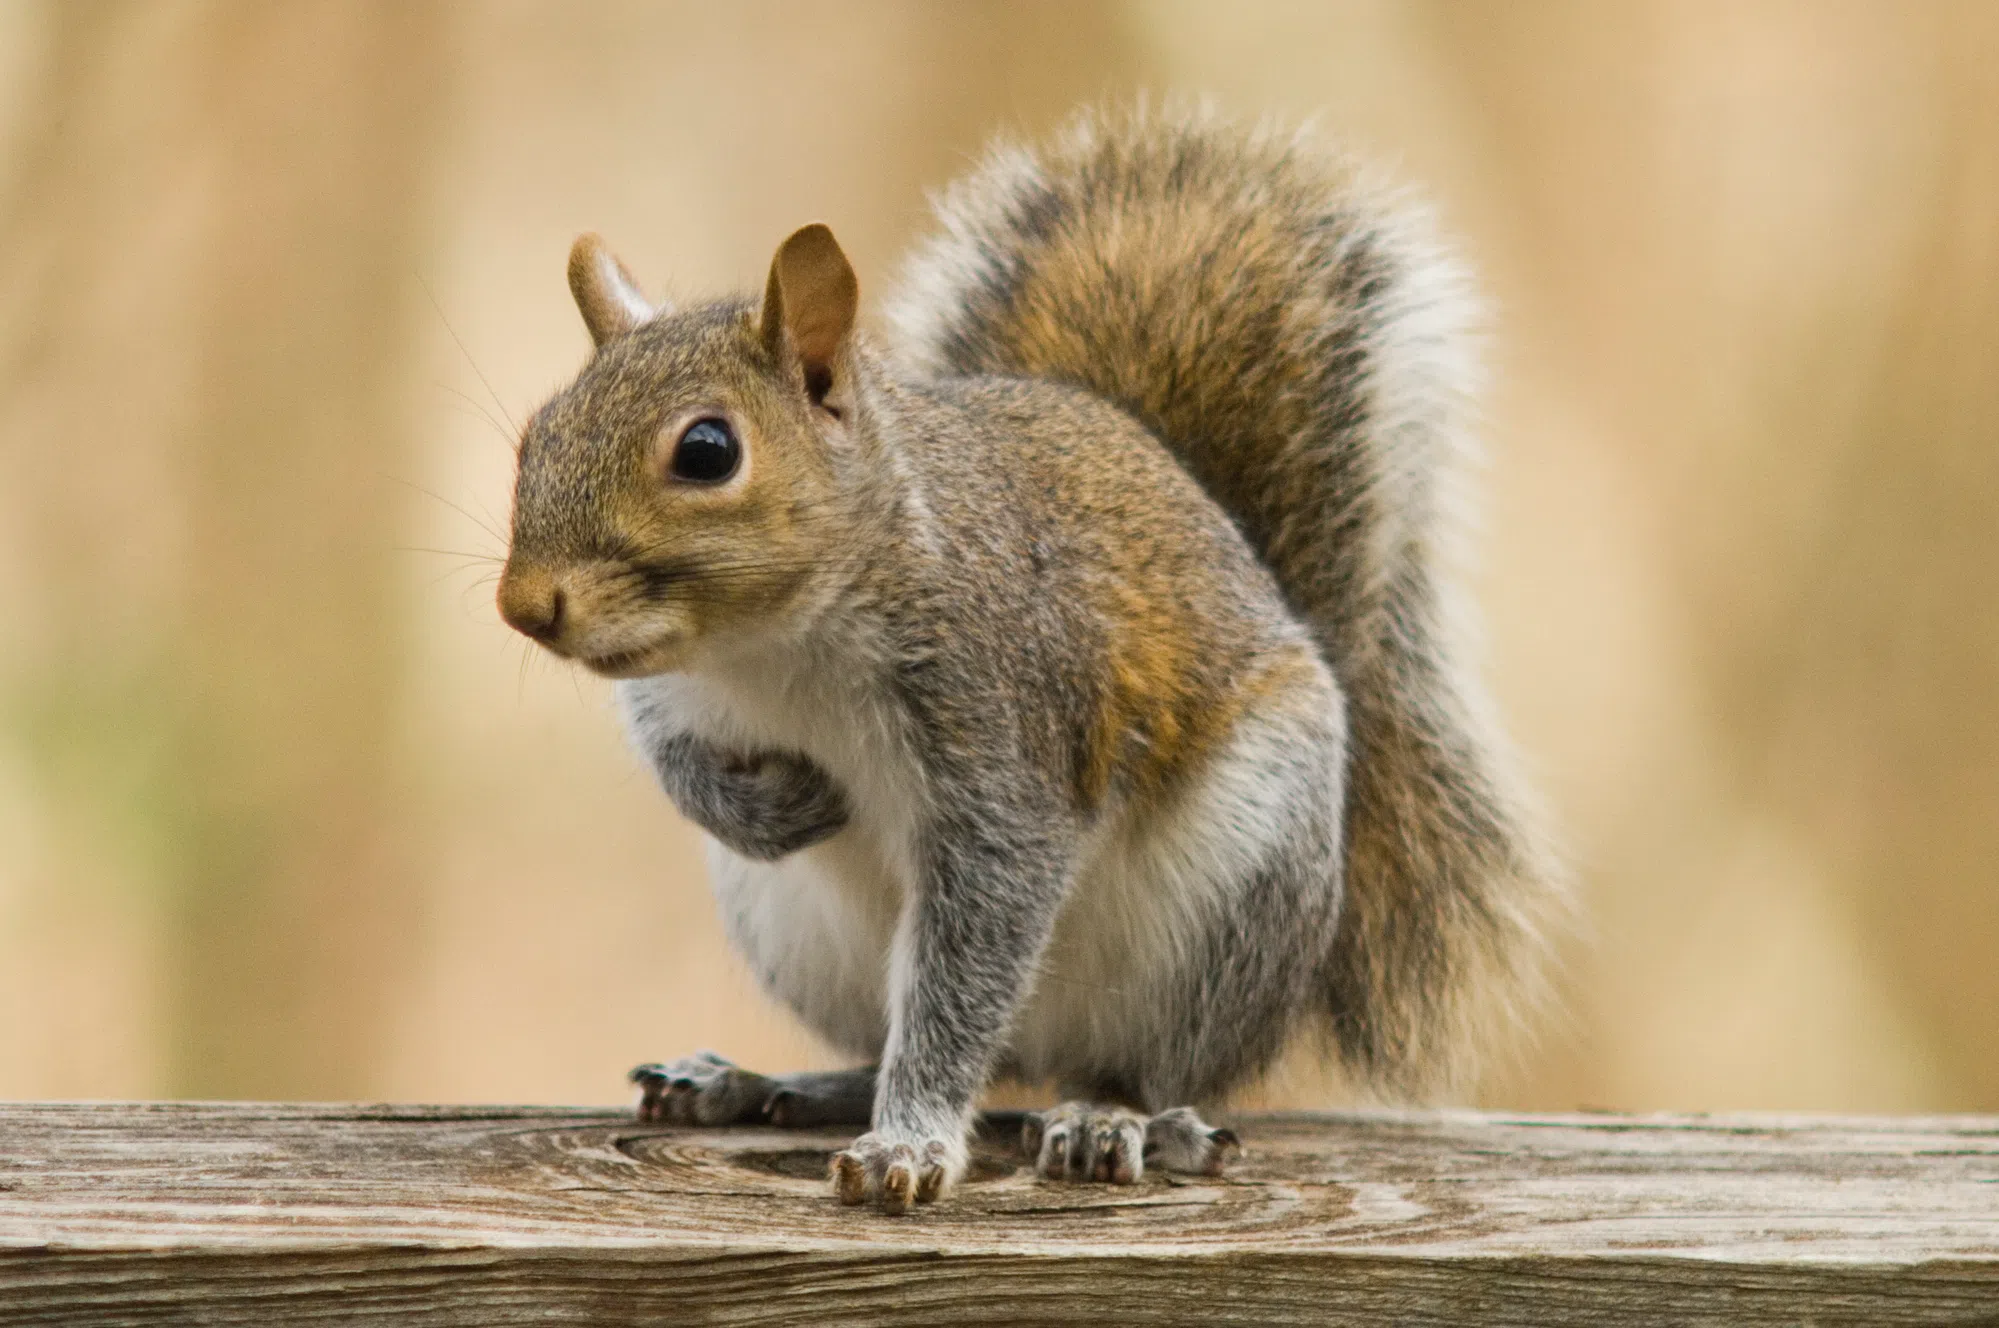 Squirrel Named 'Furry Boi' Elected to UC Berkeley Student Government